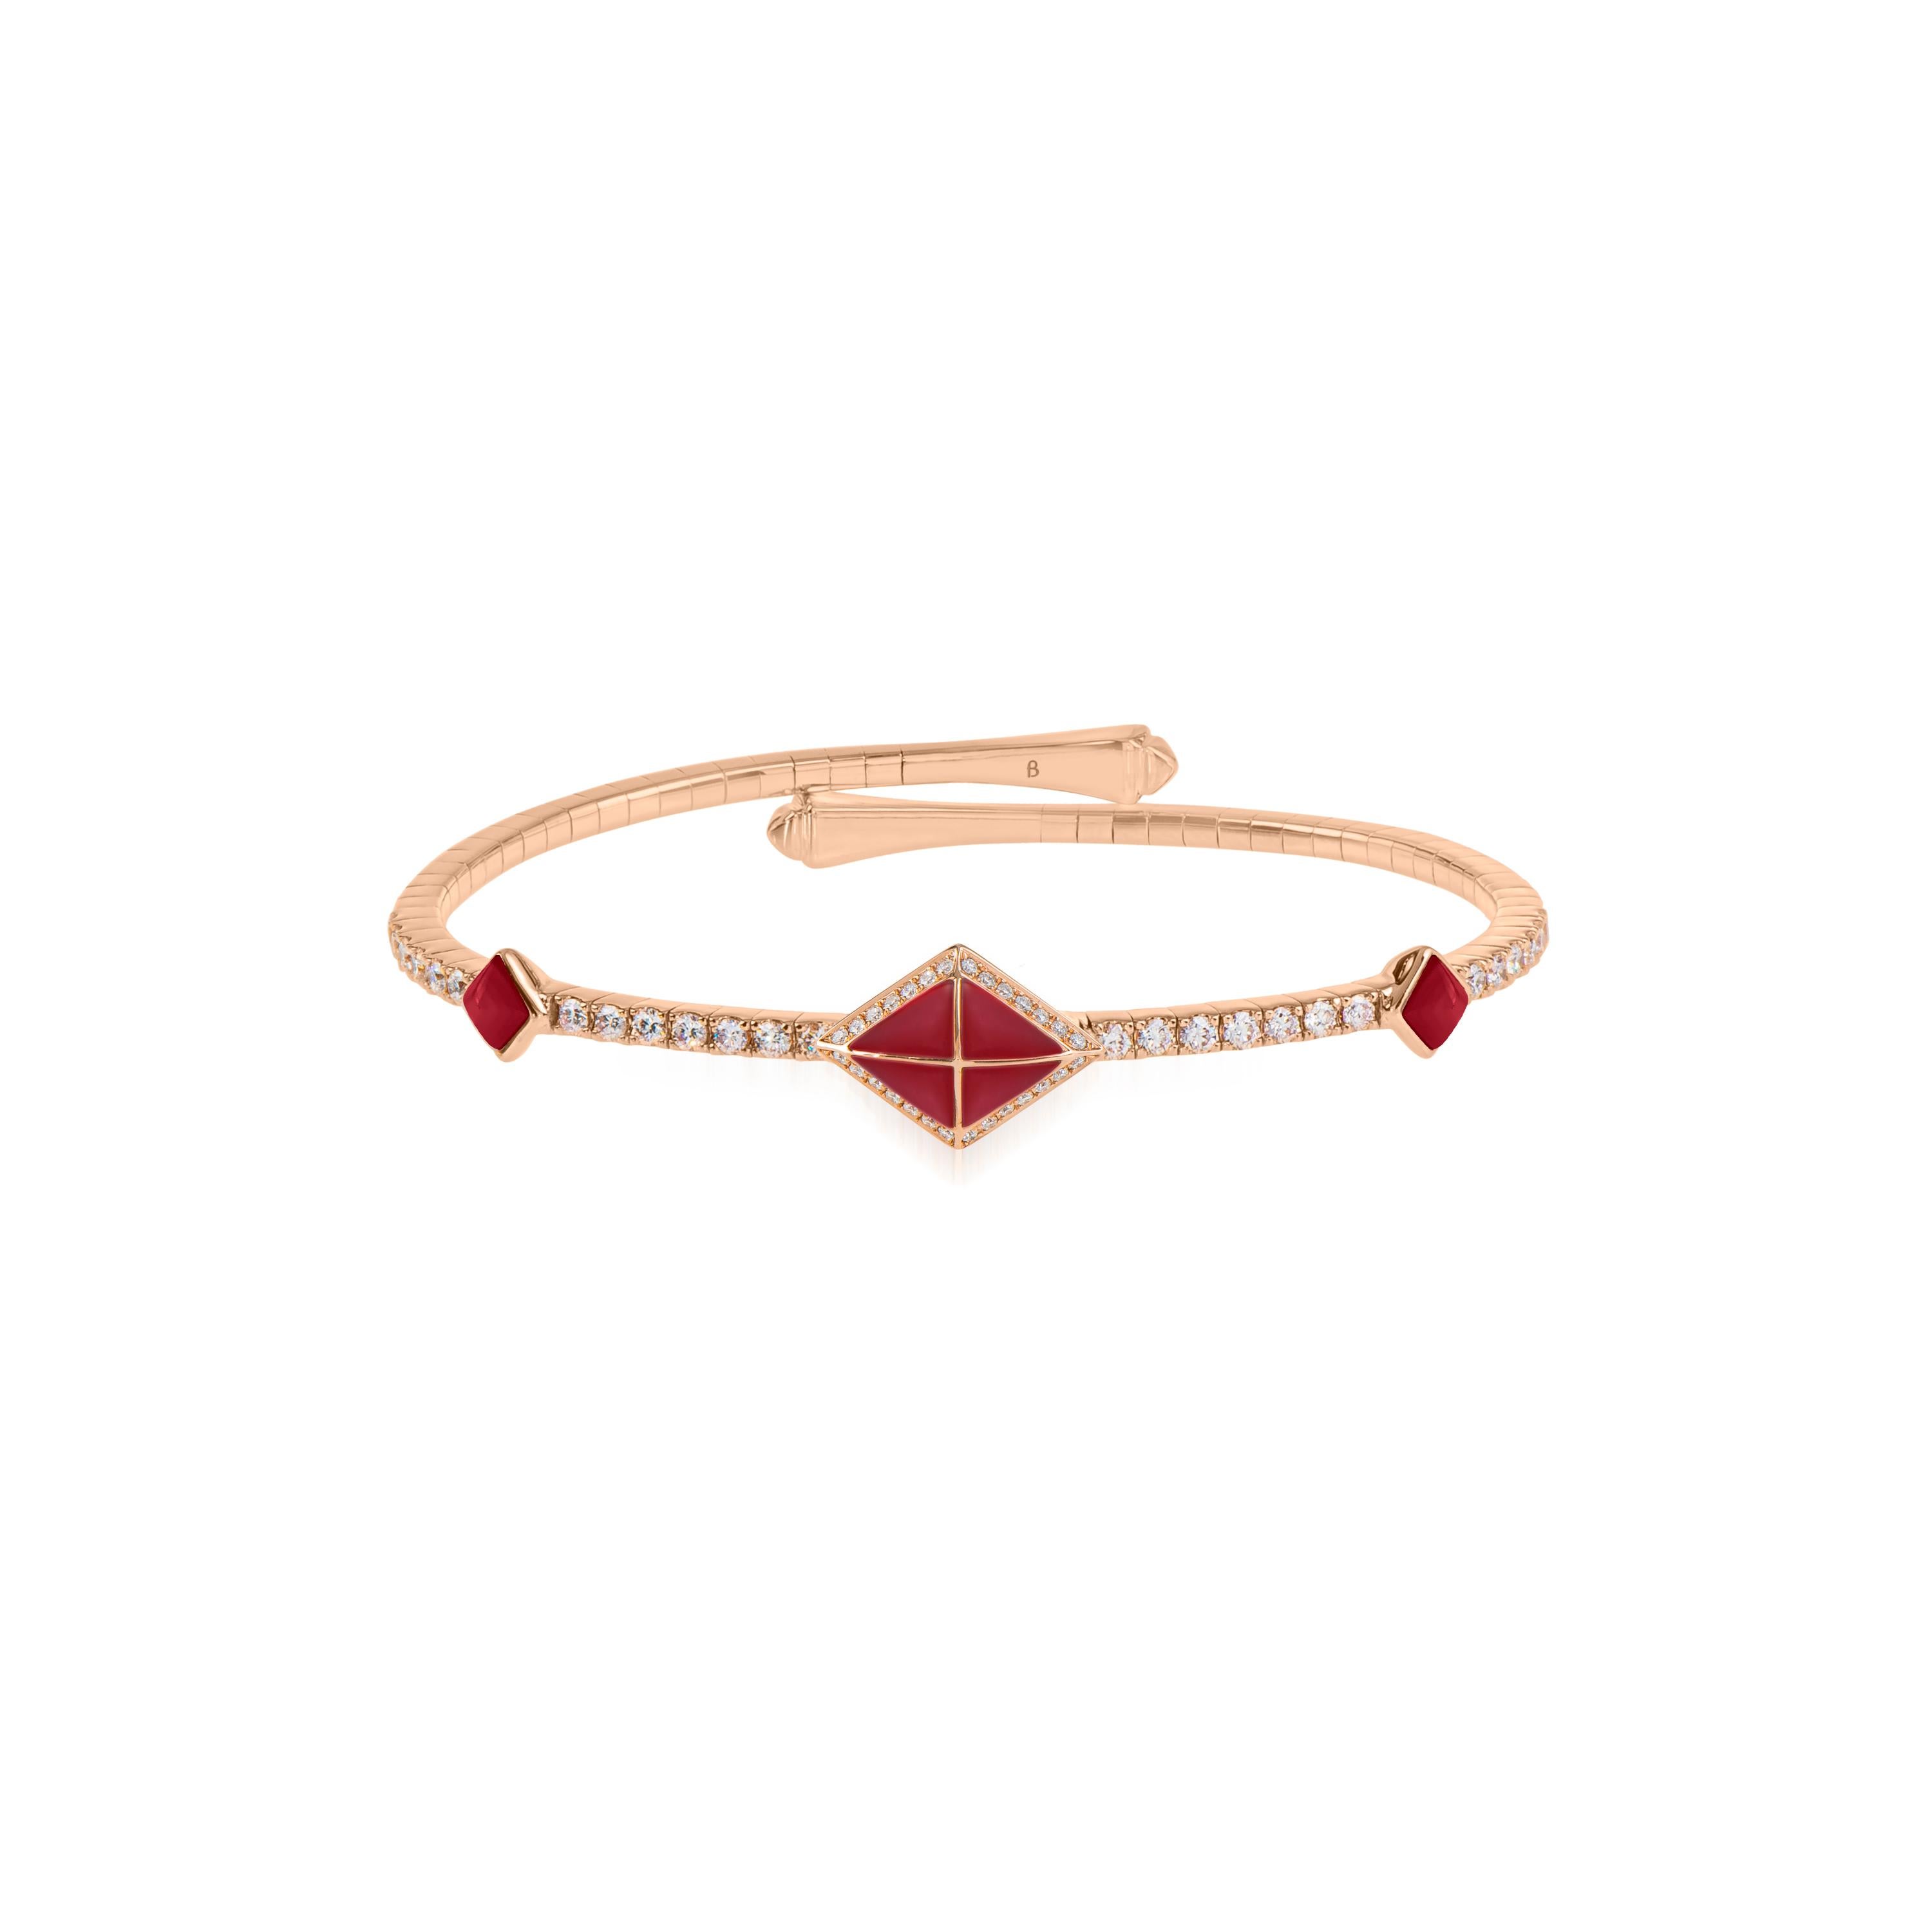 Through graphic, contemporary lines, Butani’s Tetra collection celebrates the beauty of symmetry while reimagining classic motifs of the past. 

Offering a simple elegance, the Tetra Zenith Bangle features a distinctive rhombus motif that gleams